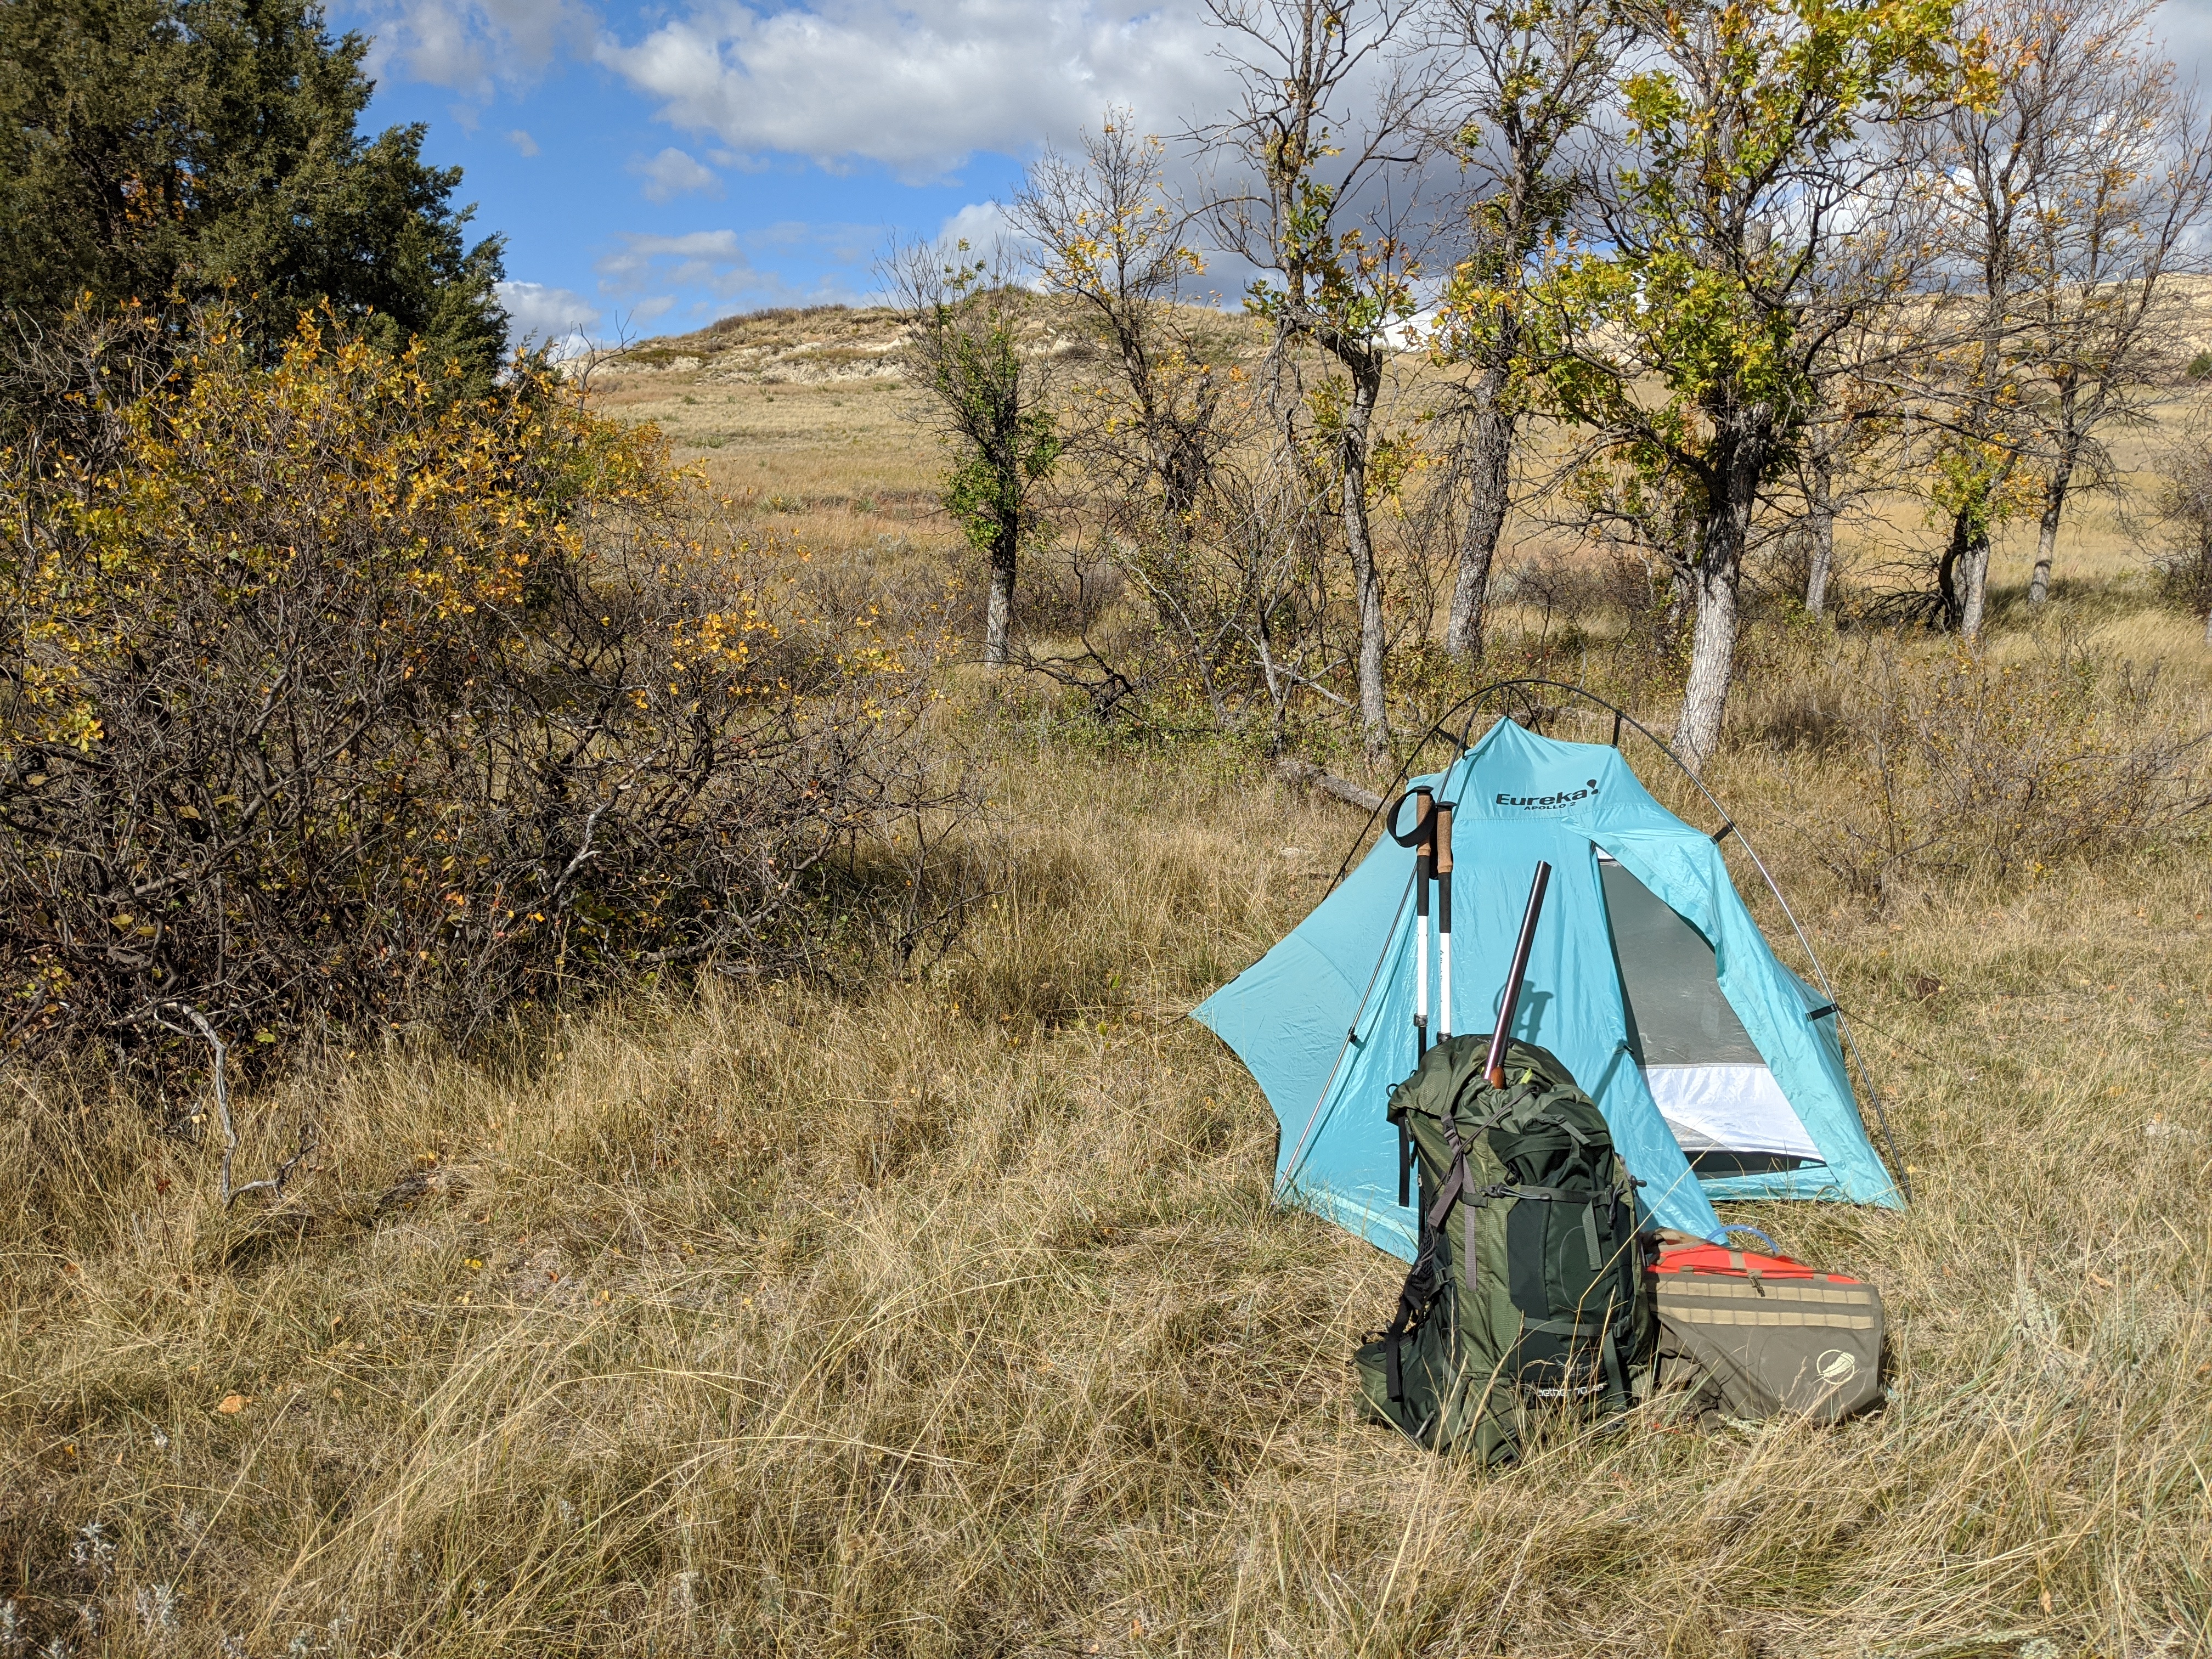 The Osprey Aether AG 70 packed between camps and ready to bird hunt!